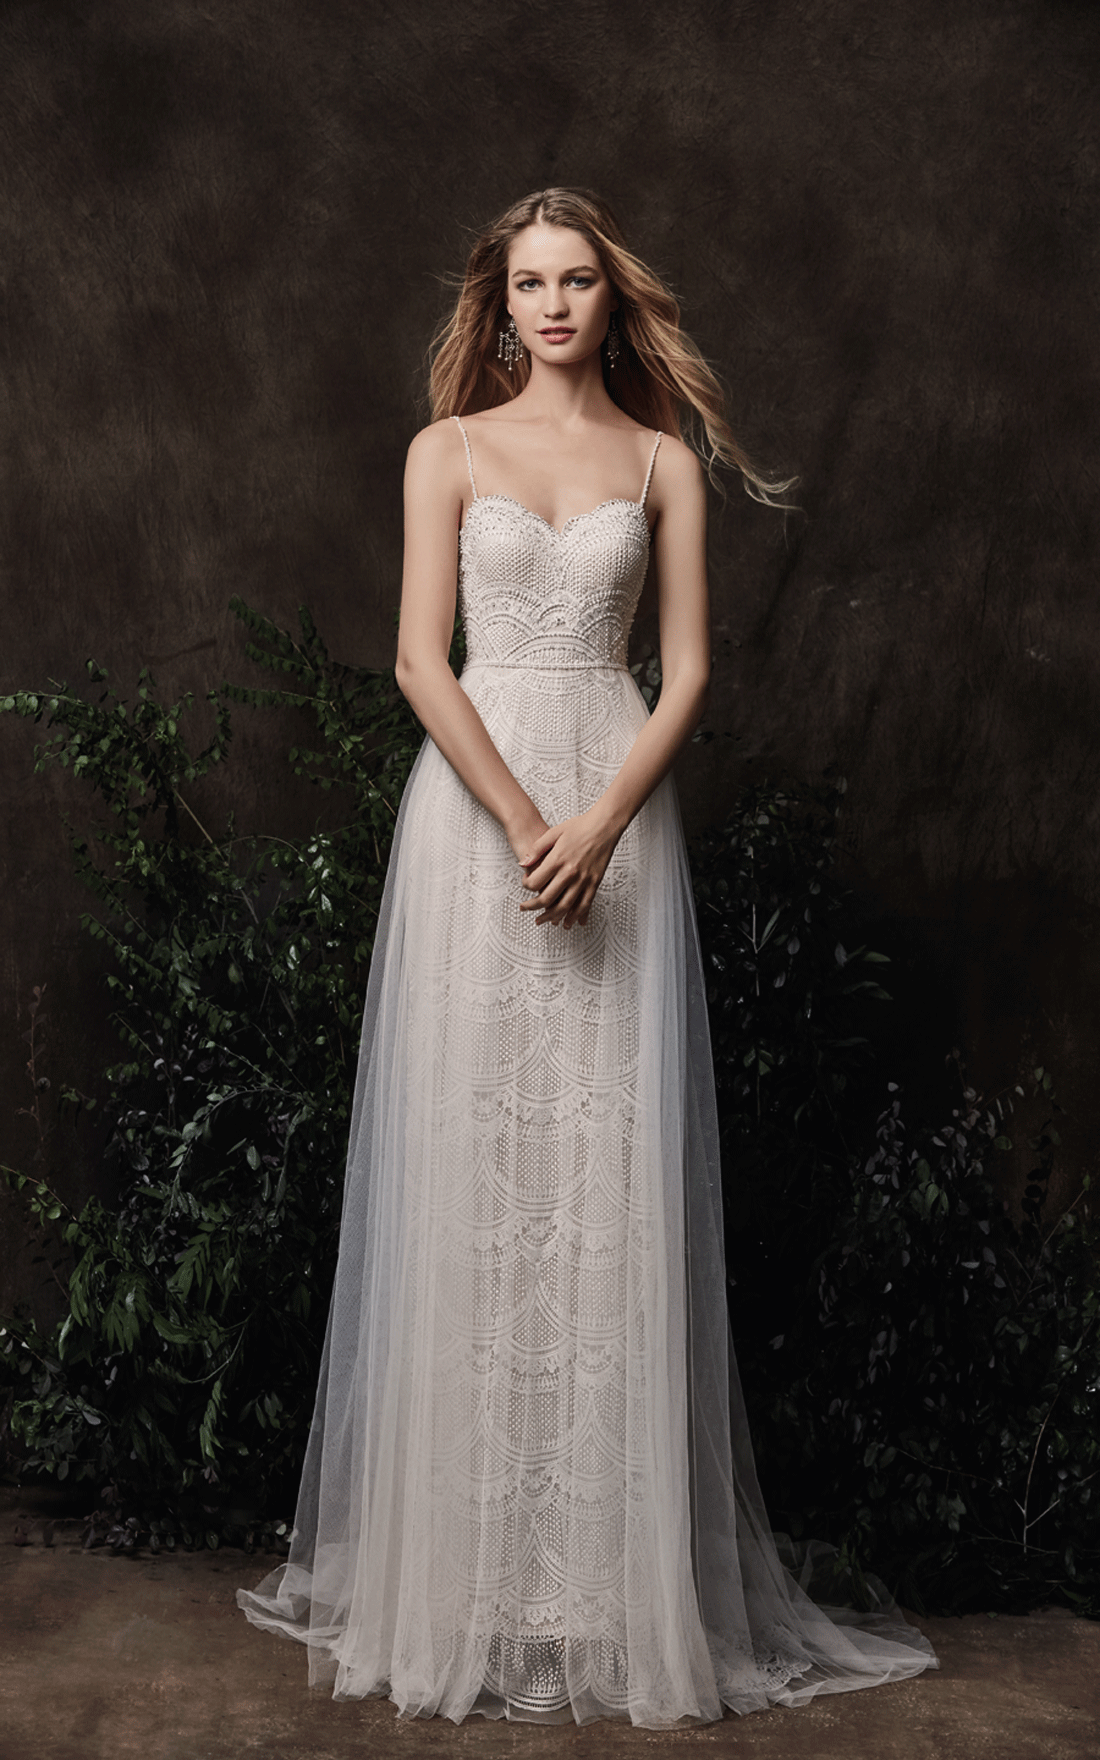 ivy-chic-nostalgia-bohemian-affordable-wedding-dresses-ivory-and-beau-savannah-bridal-boutique-savannah-wedding-dresses-savannah-bridal-shop-savannah-wedding-shop-boho-bride-boho-wedding-dresses-trunk-show.gif